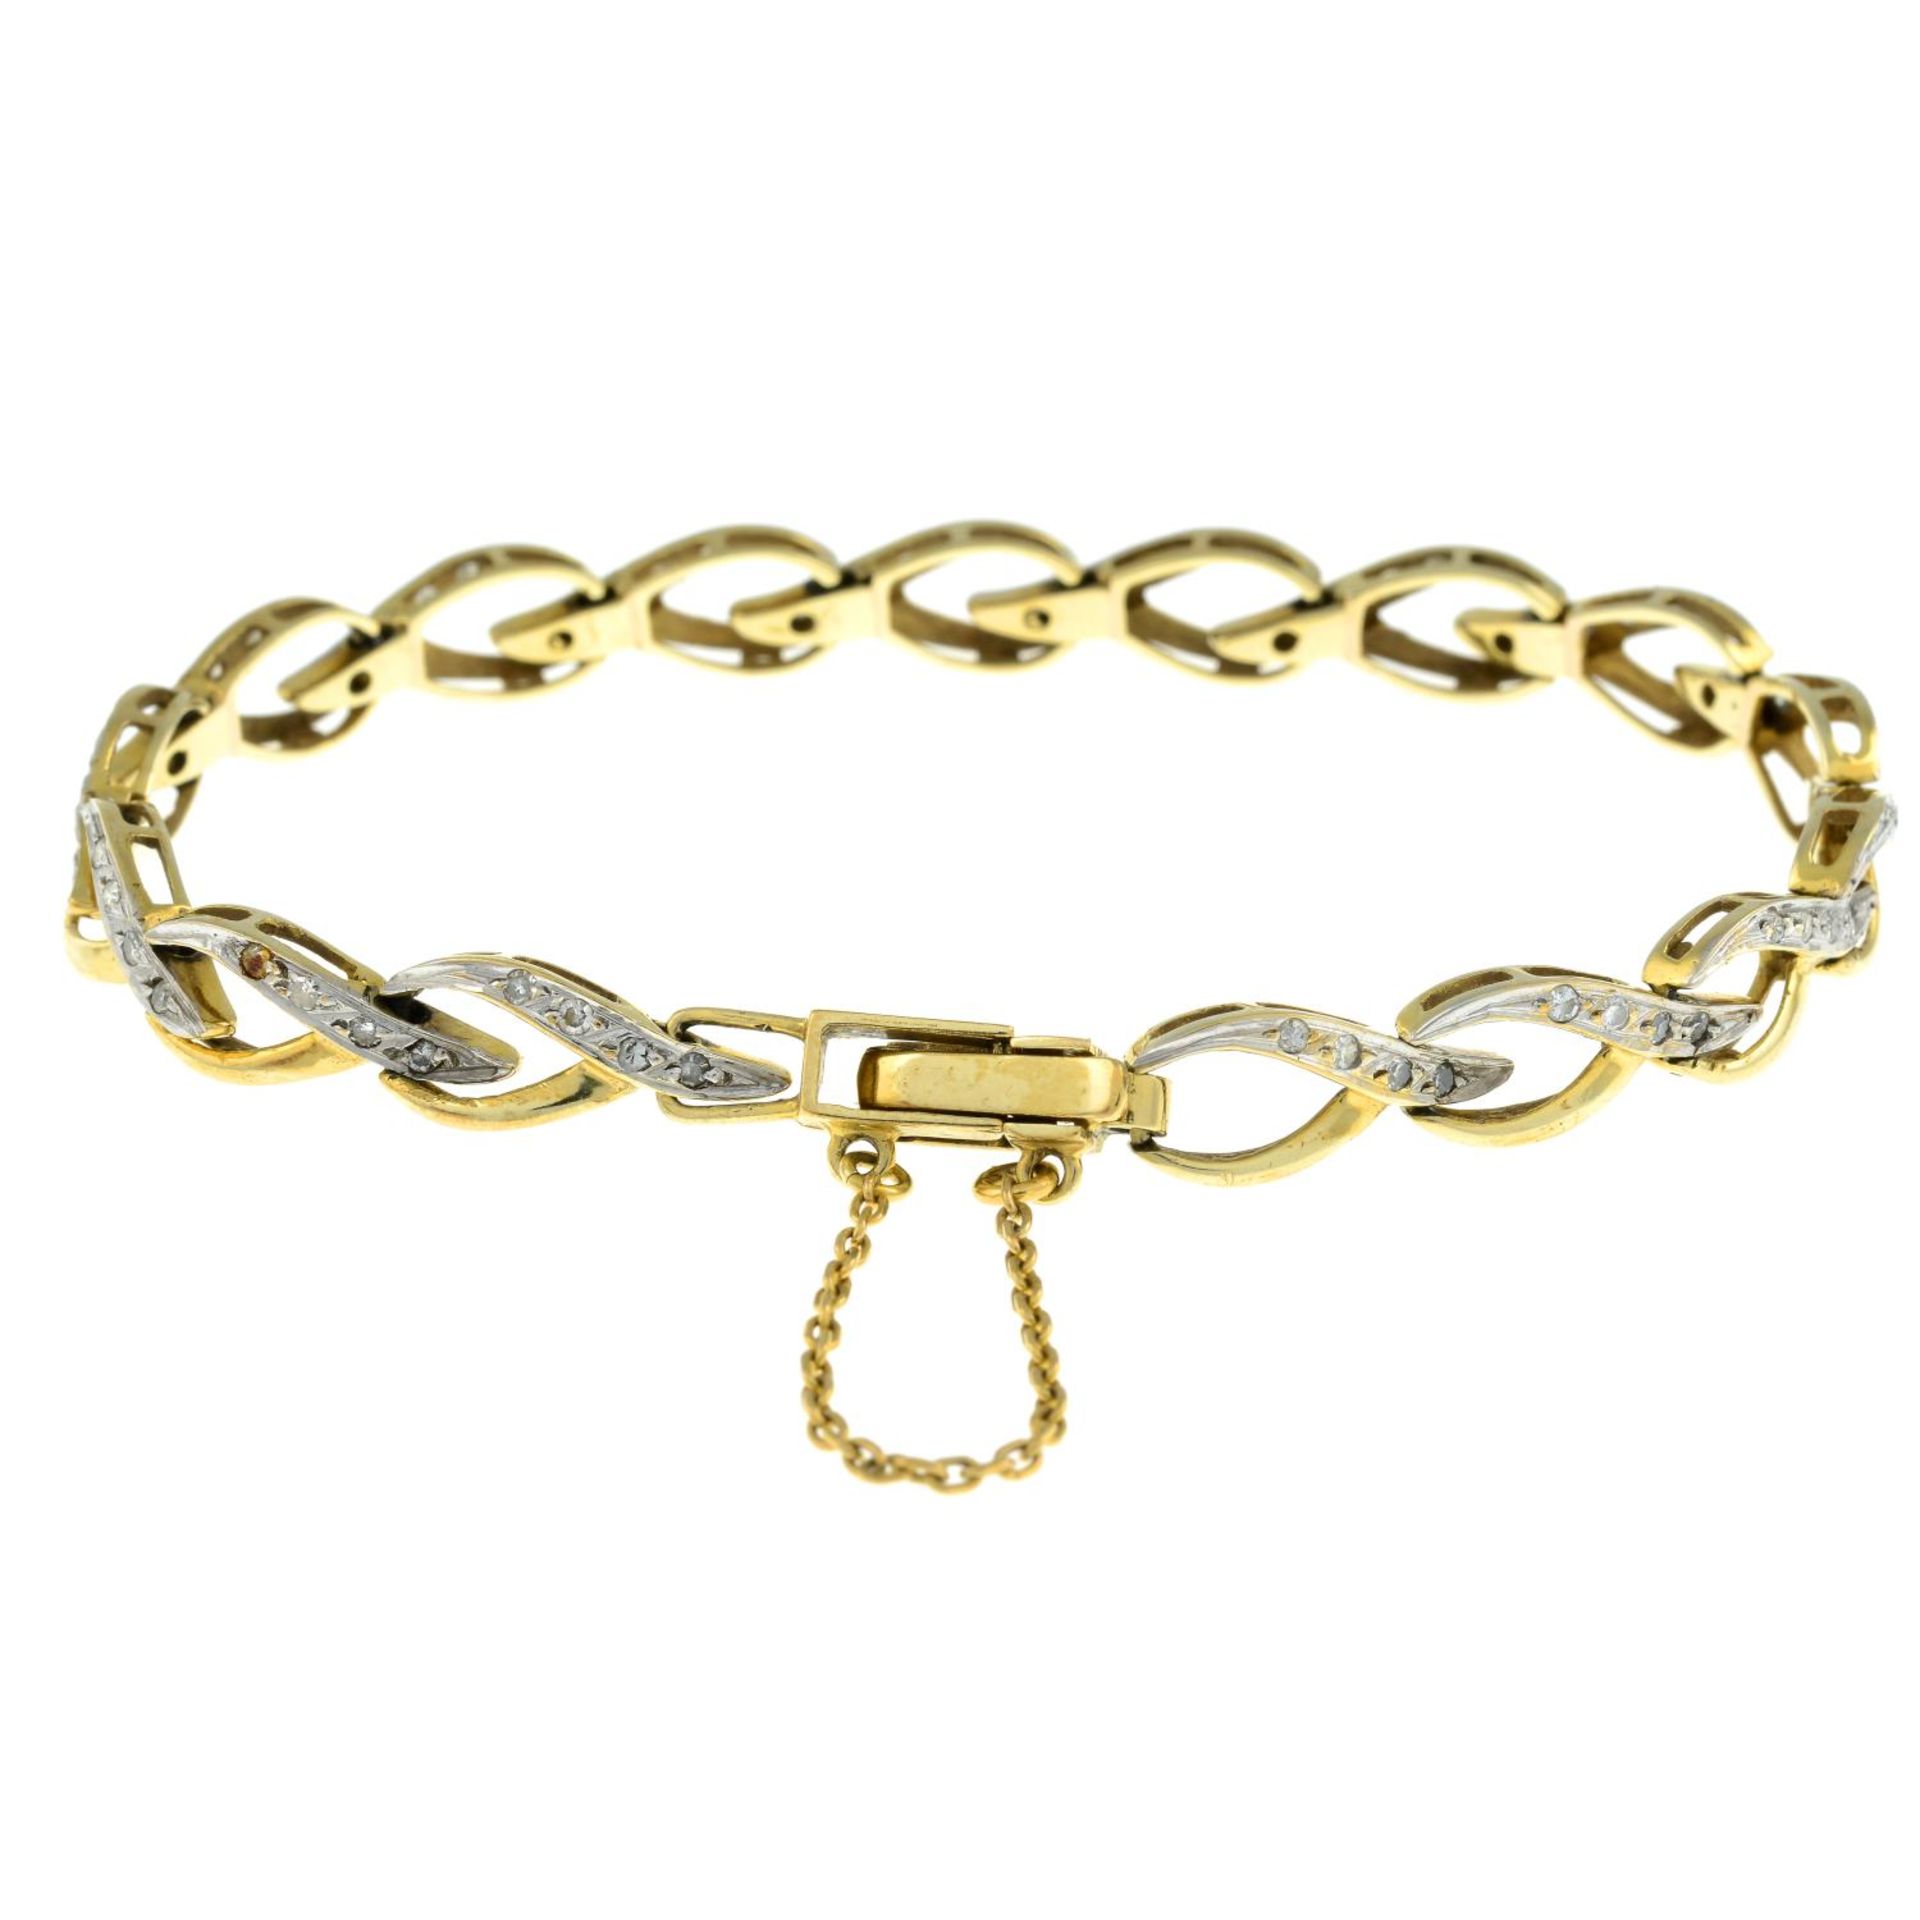 A 9ct gold diamond bracelet.Estimated total diamond weight 0.30ct. - Image 2 of 2